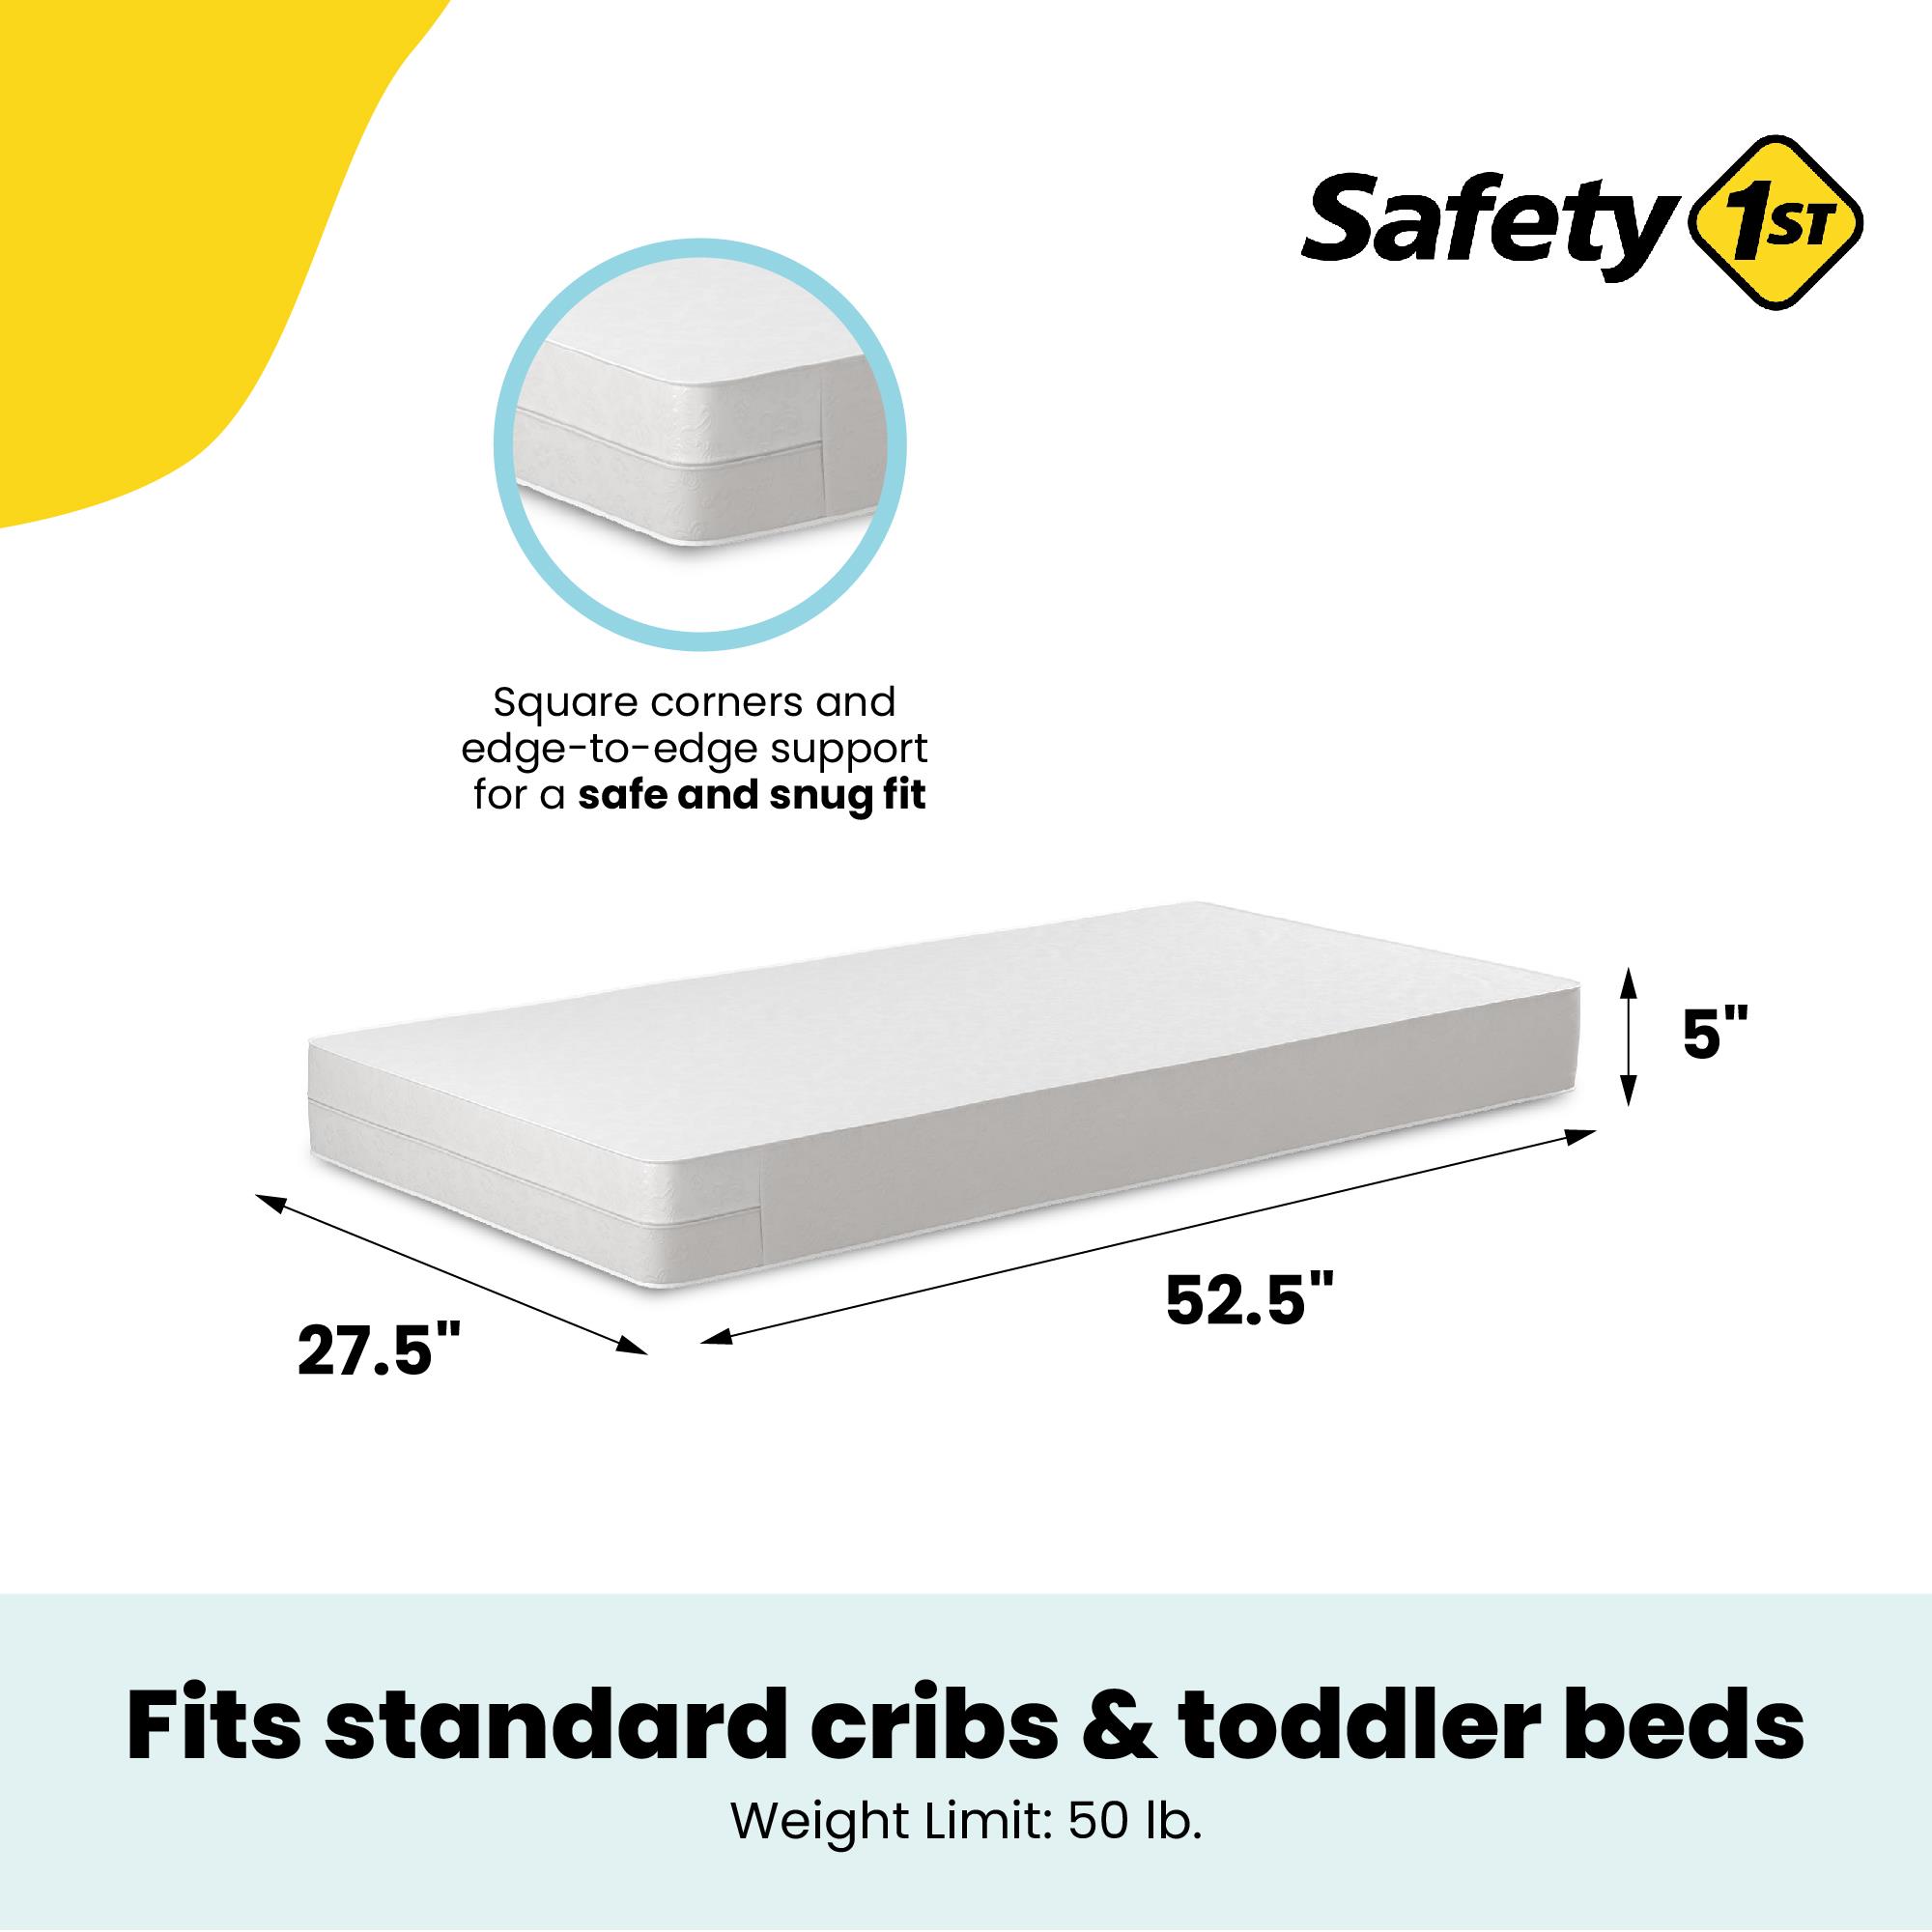 Safety 1st Sweet Dreams 5" Crib & Toddler Mattress with Waterproof Cover| Greenguard Gold Certified - image 3 of 12